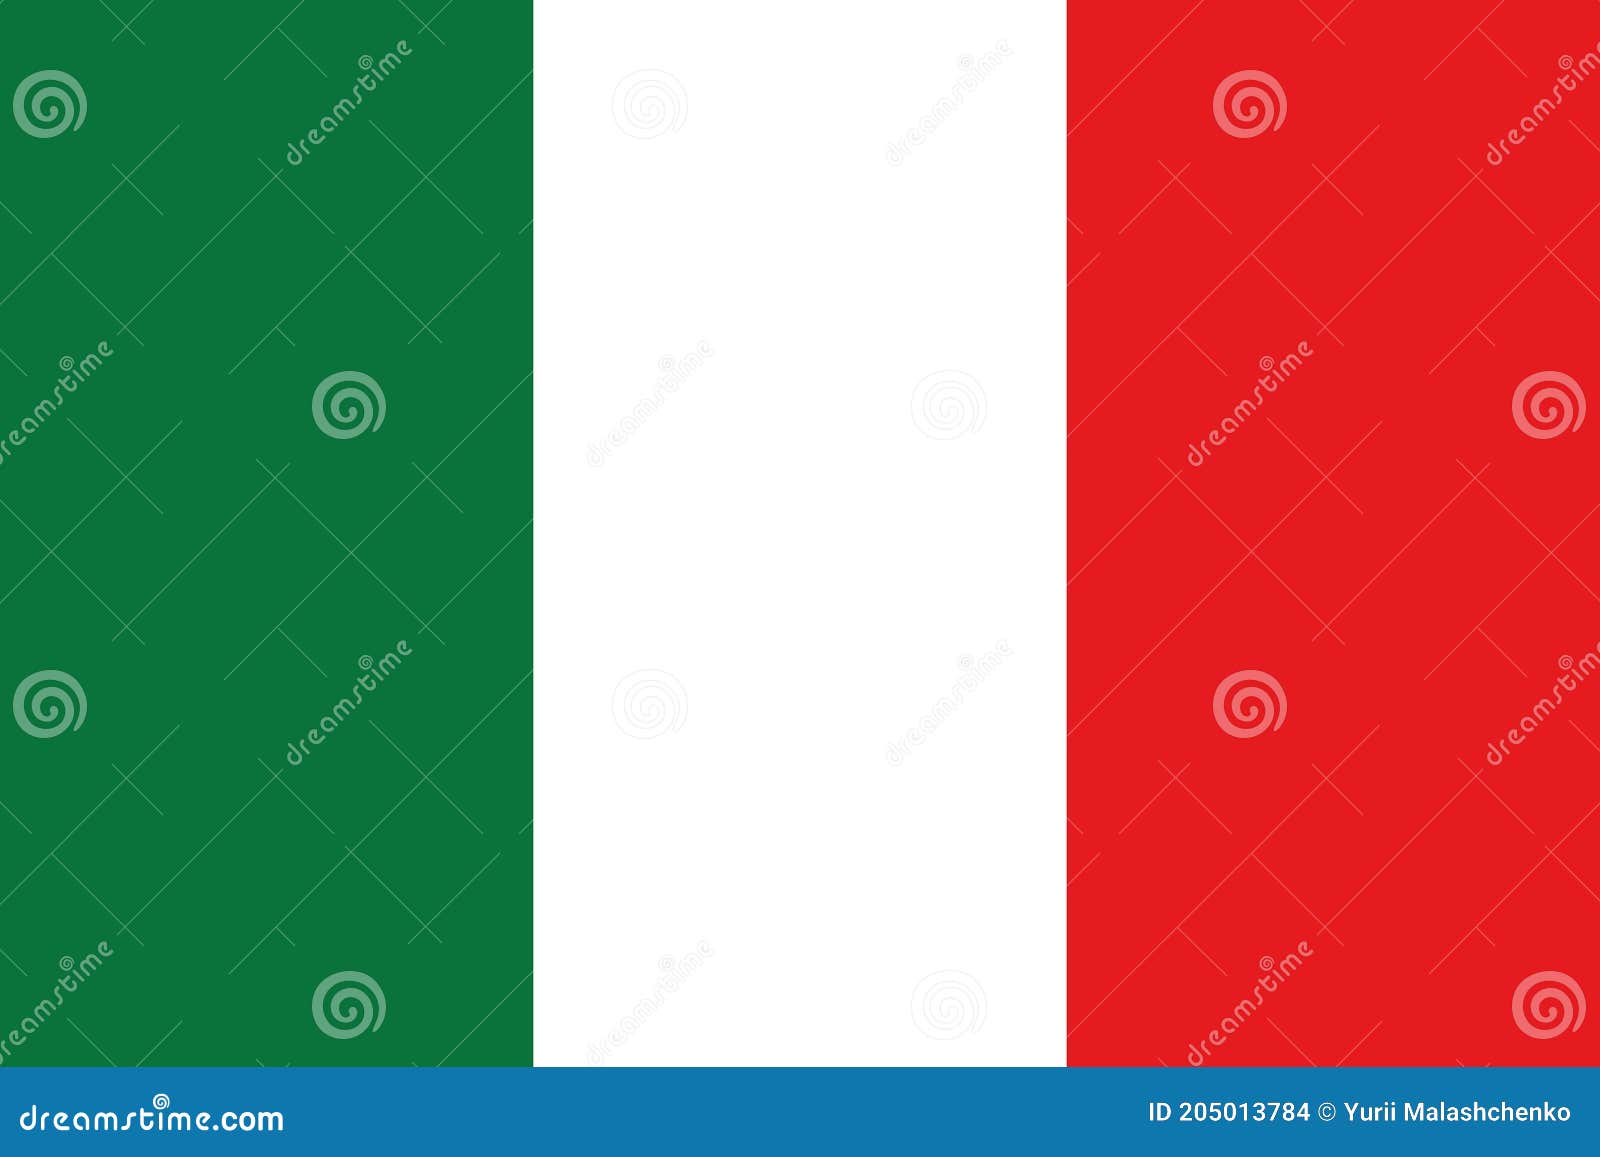 the national flag of the european country italy